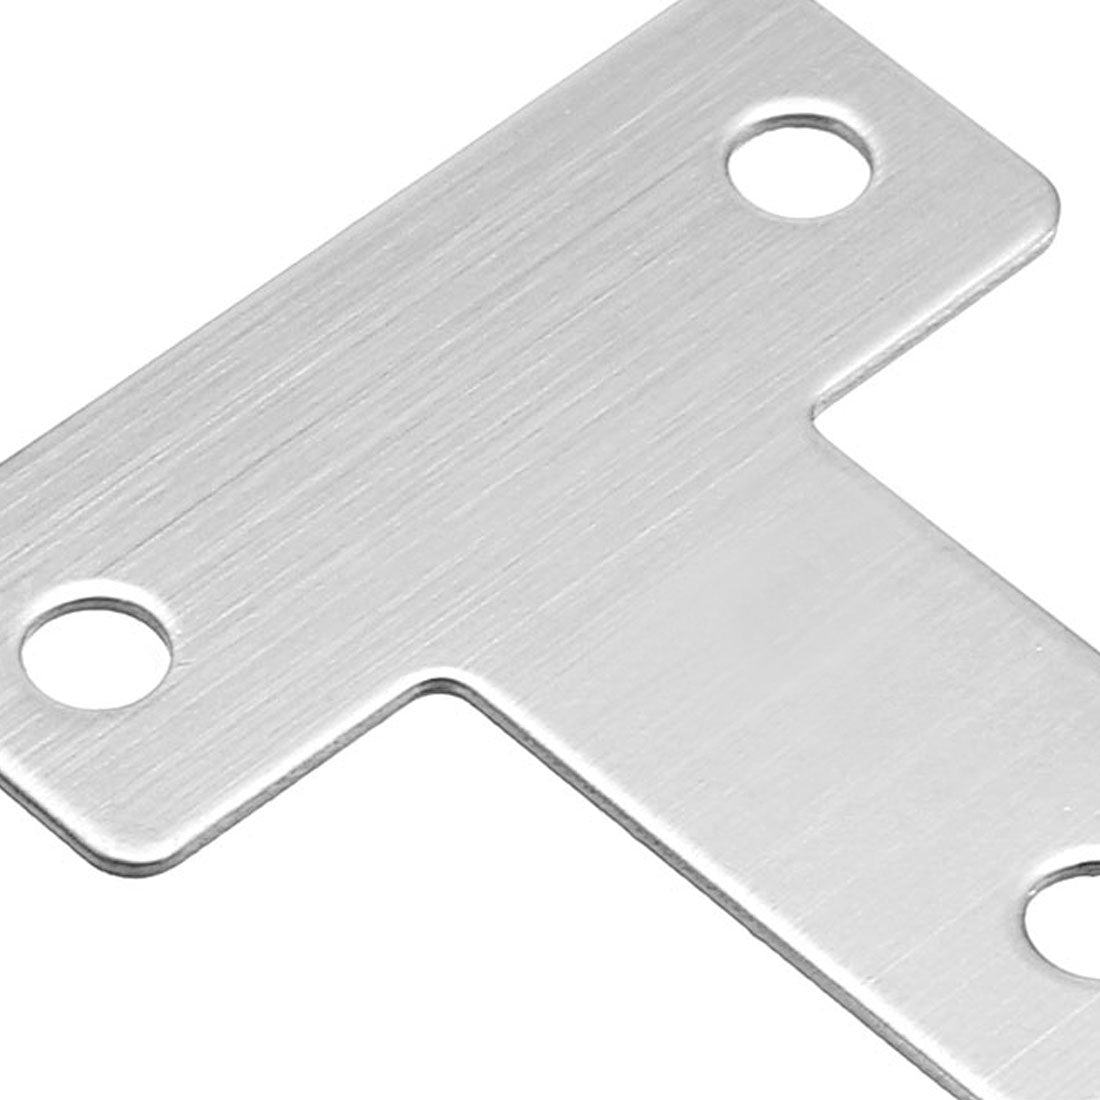 uxcell Uxcell Flat T Shape Repair Mending Plate, 43mmx43mm, Stainless Steel Joining Bracket Support Brace, 20 Pcs